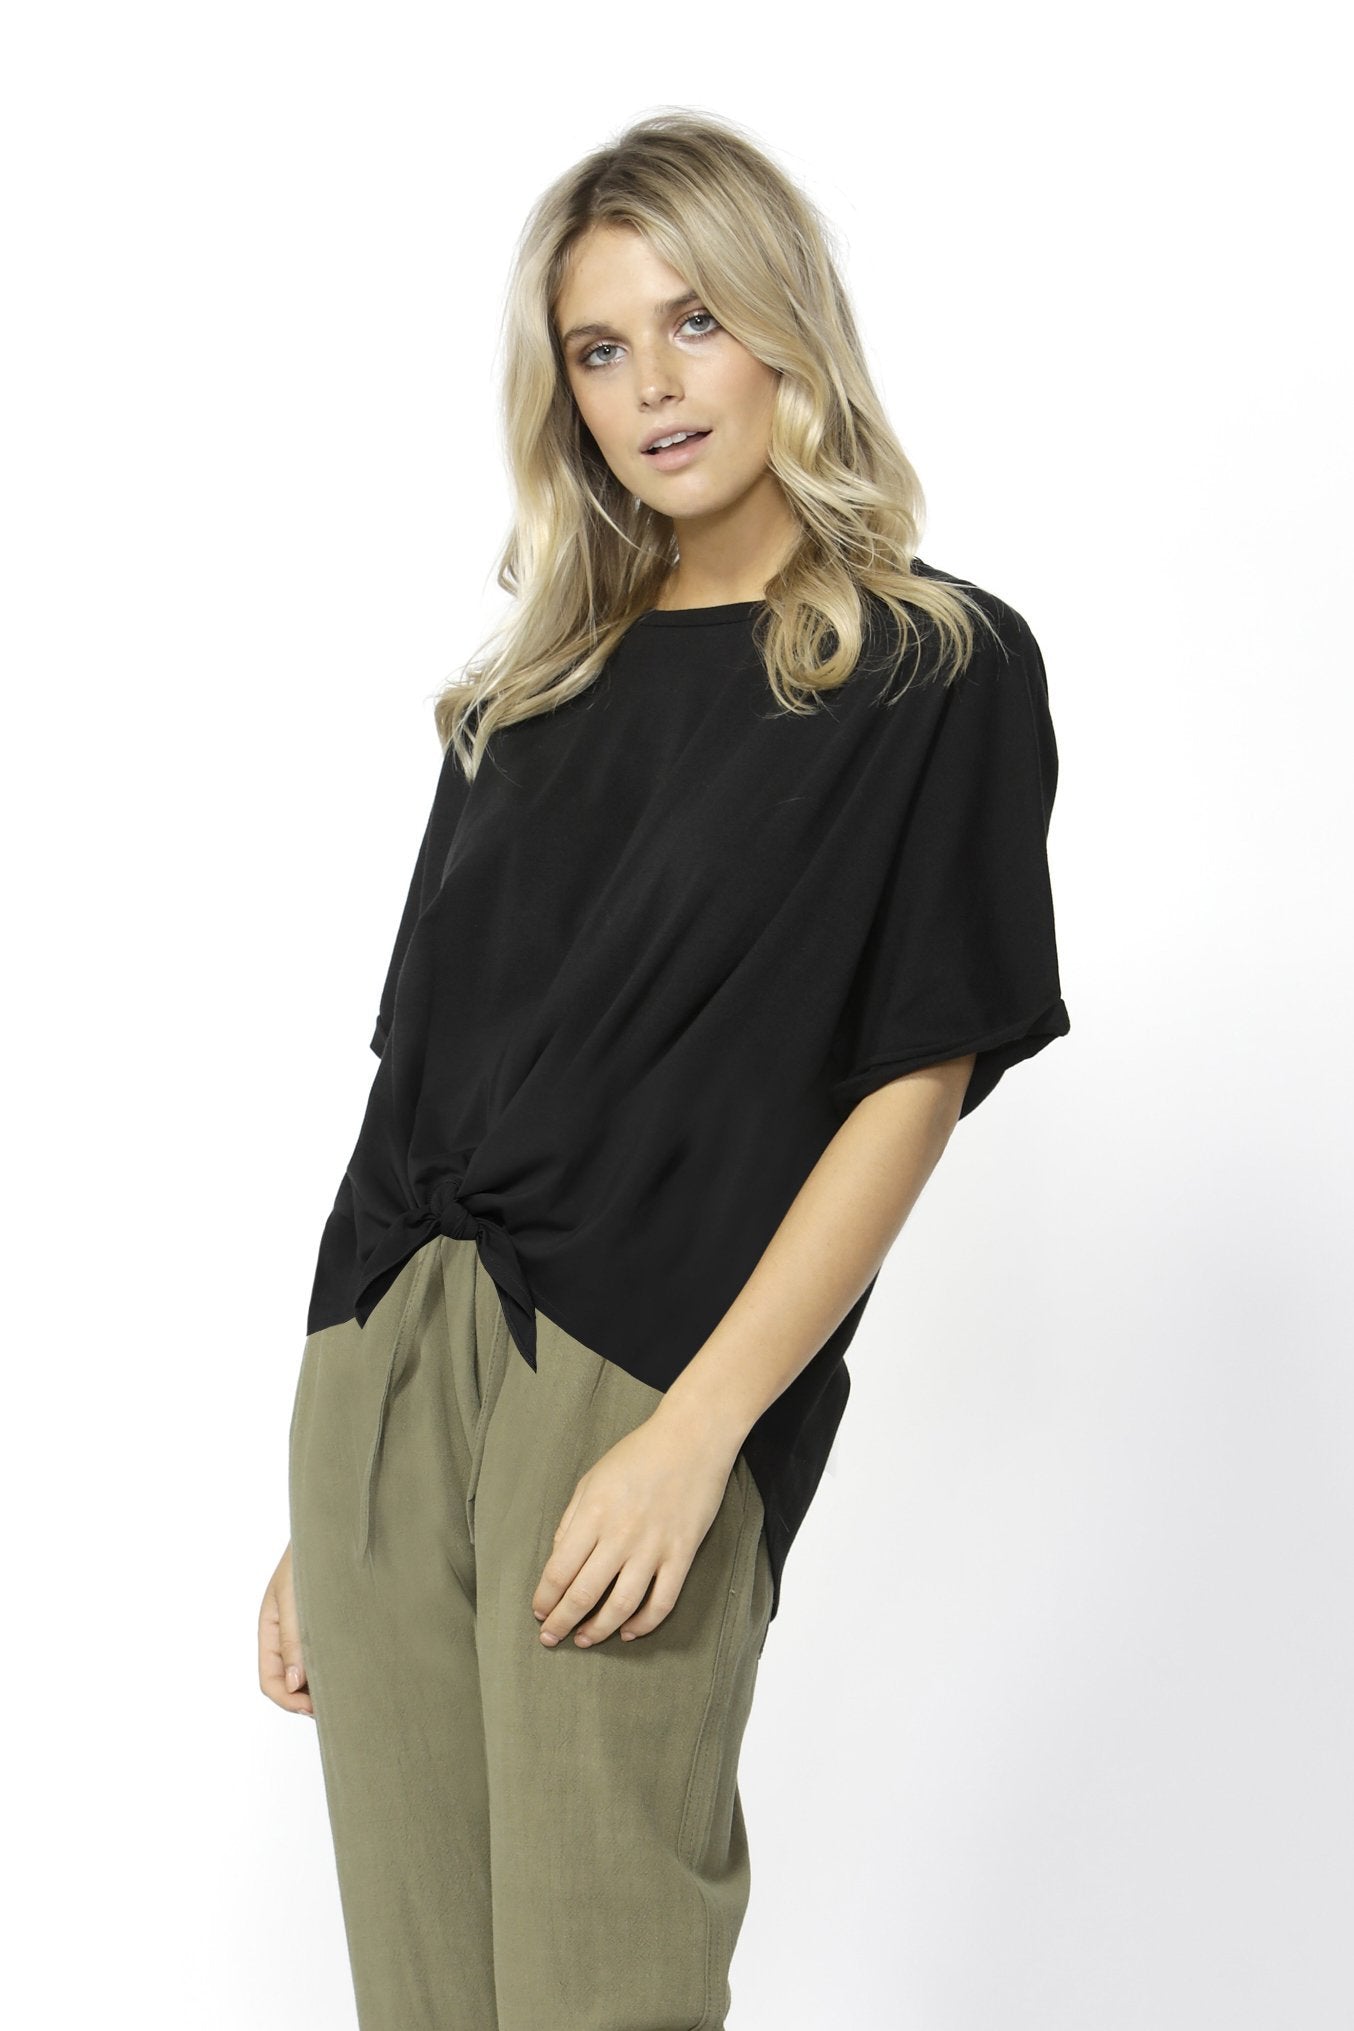 Betty Basics Katie Knot Top in Black Size 6 or 8 - Hey Sara